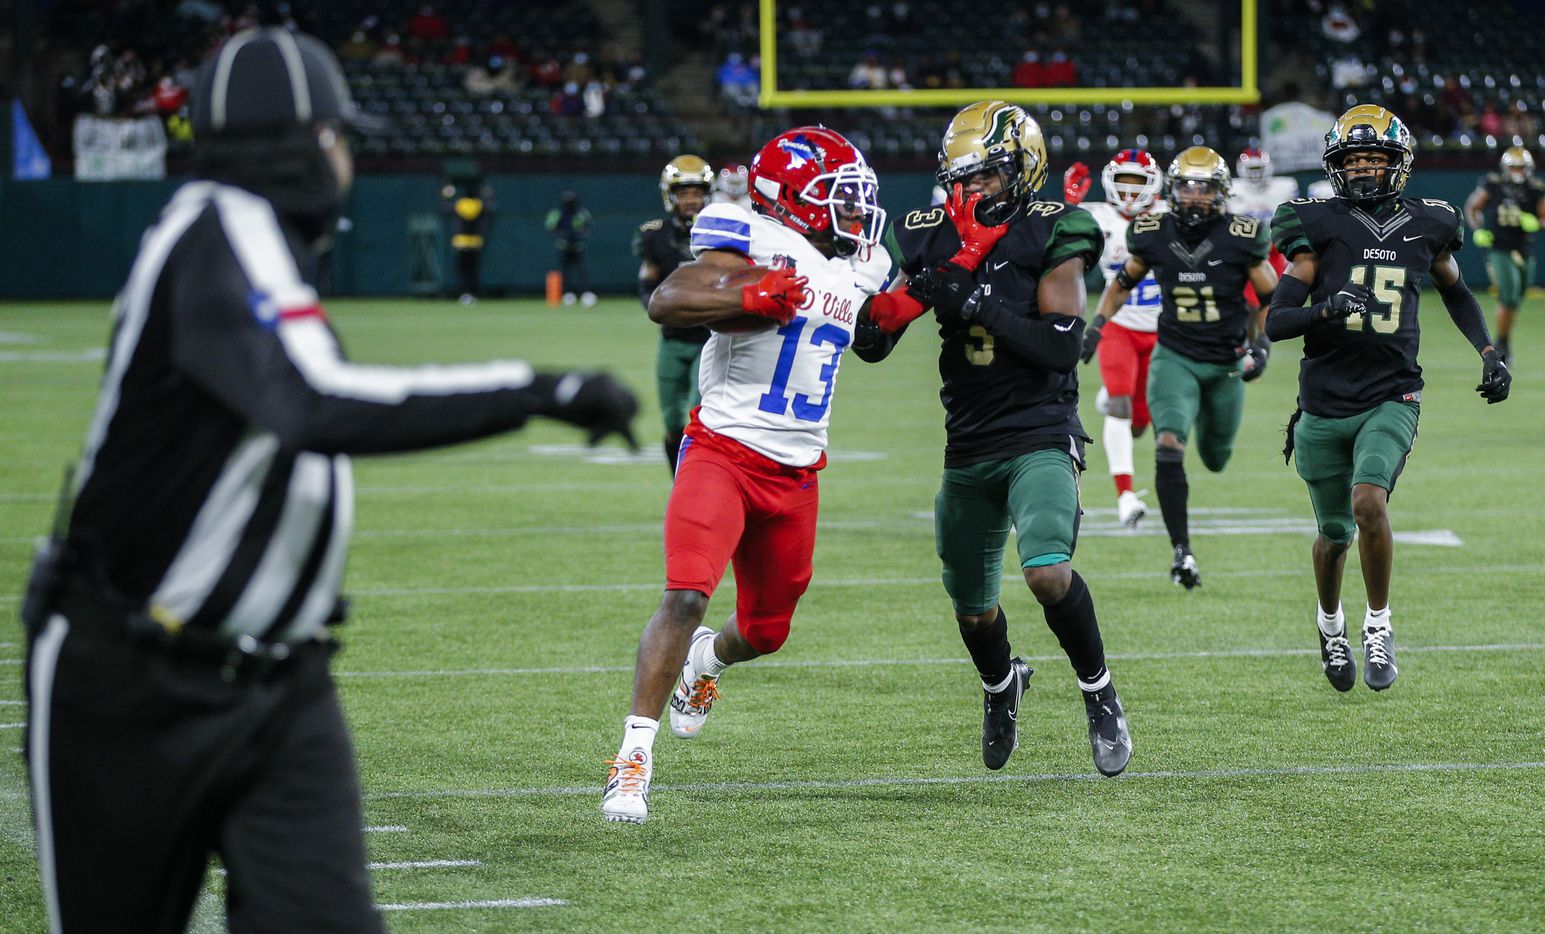 Duncanville senior running back Roderick Daniels Jr. (13) battles DeSoto junior safety Devyn Bobby (3) for yardage during the first half of a Class 6A Division I Region II final high school football game, Saturday, January 2, 2021.  Duncanville won 56-28. (Brandon Wade/Special Contributor)